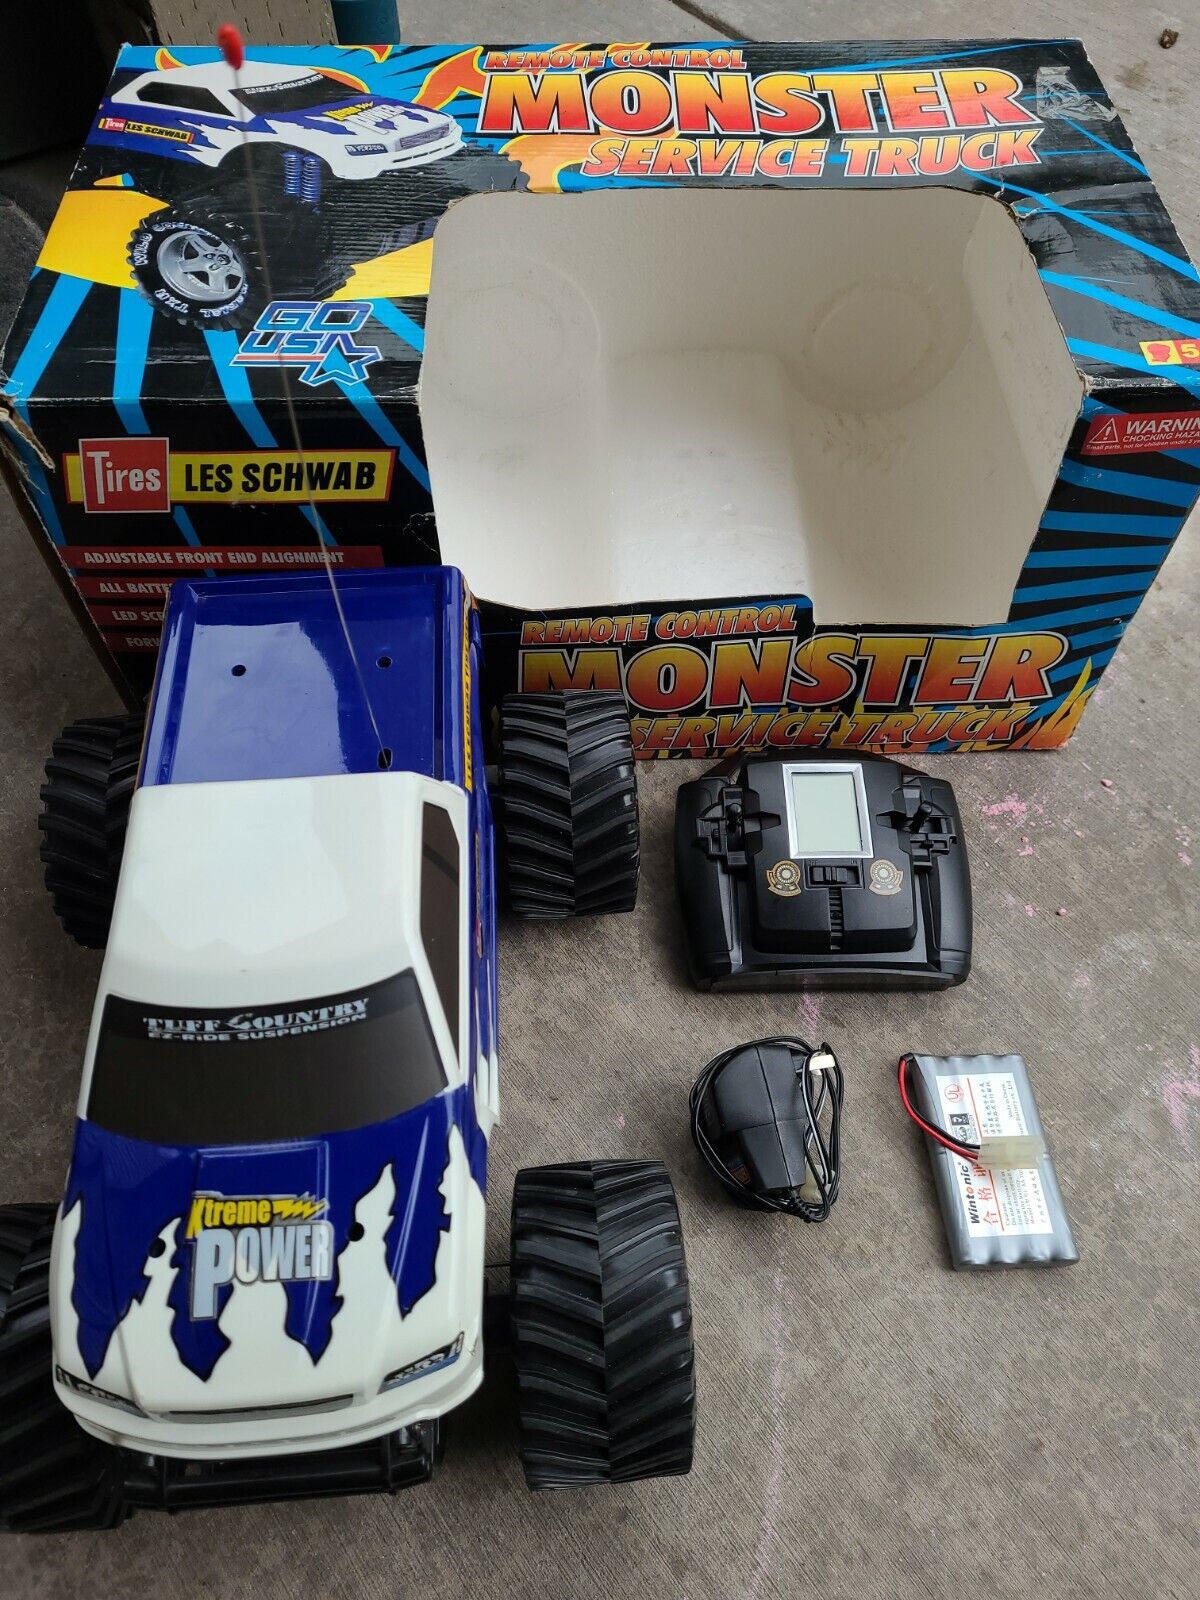 Les Schwab Xtreme Power RC Monster Truck Service Truck with 27mhz 